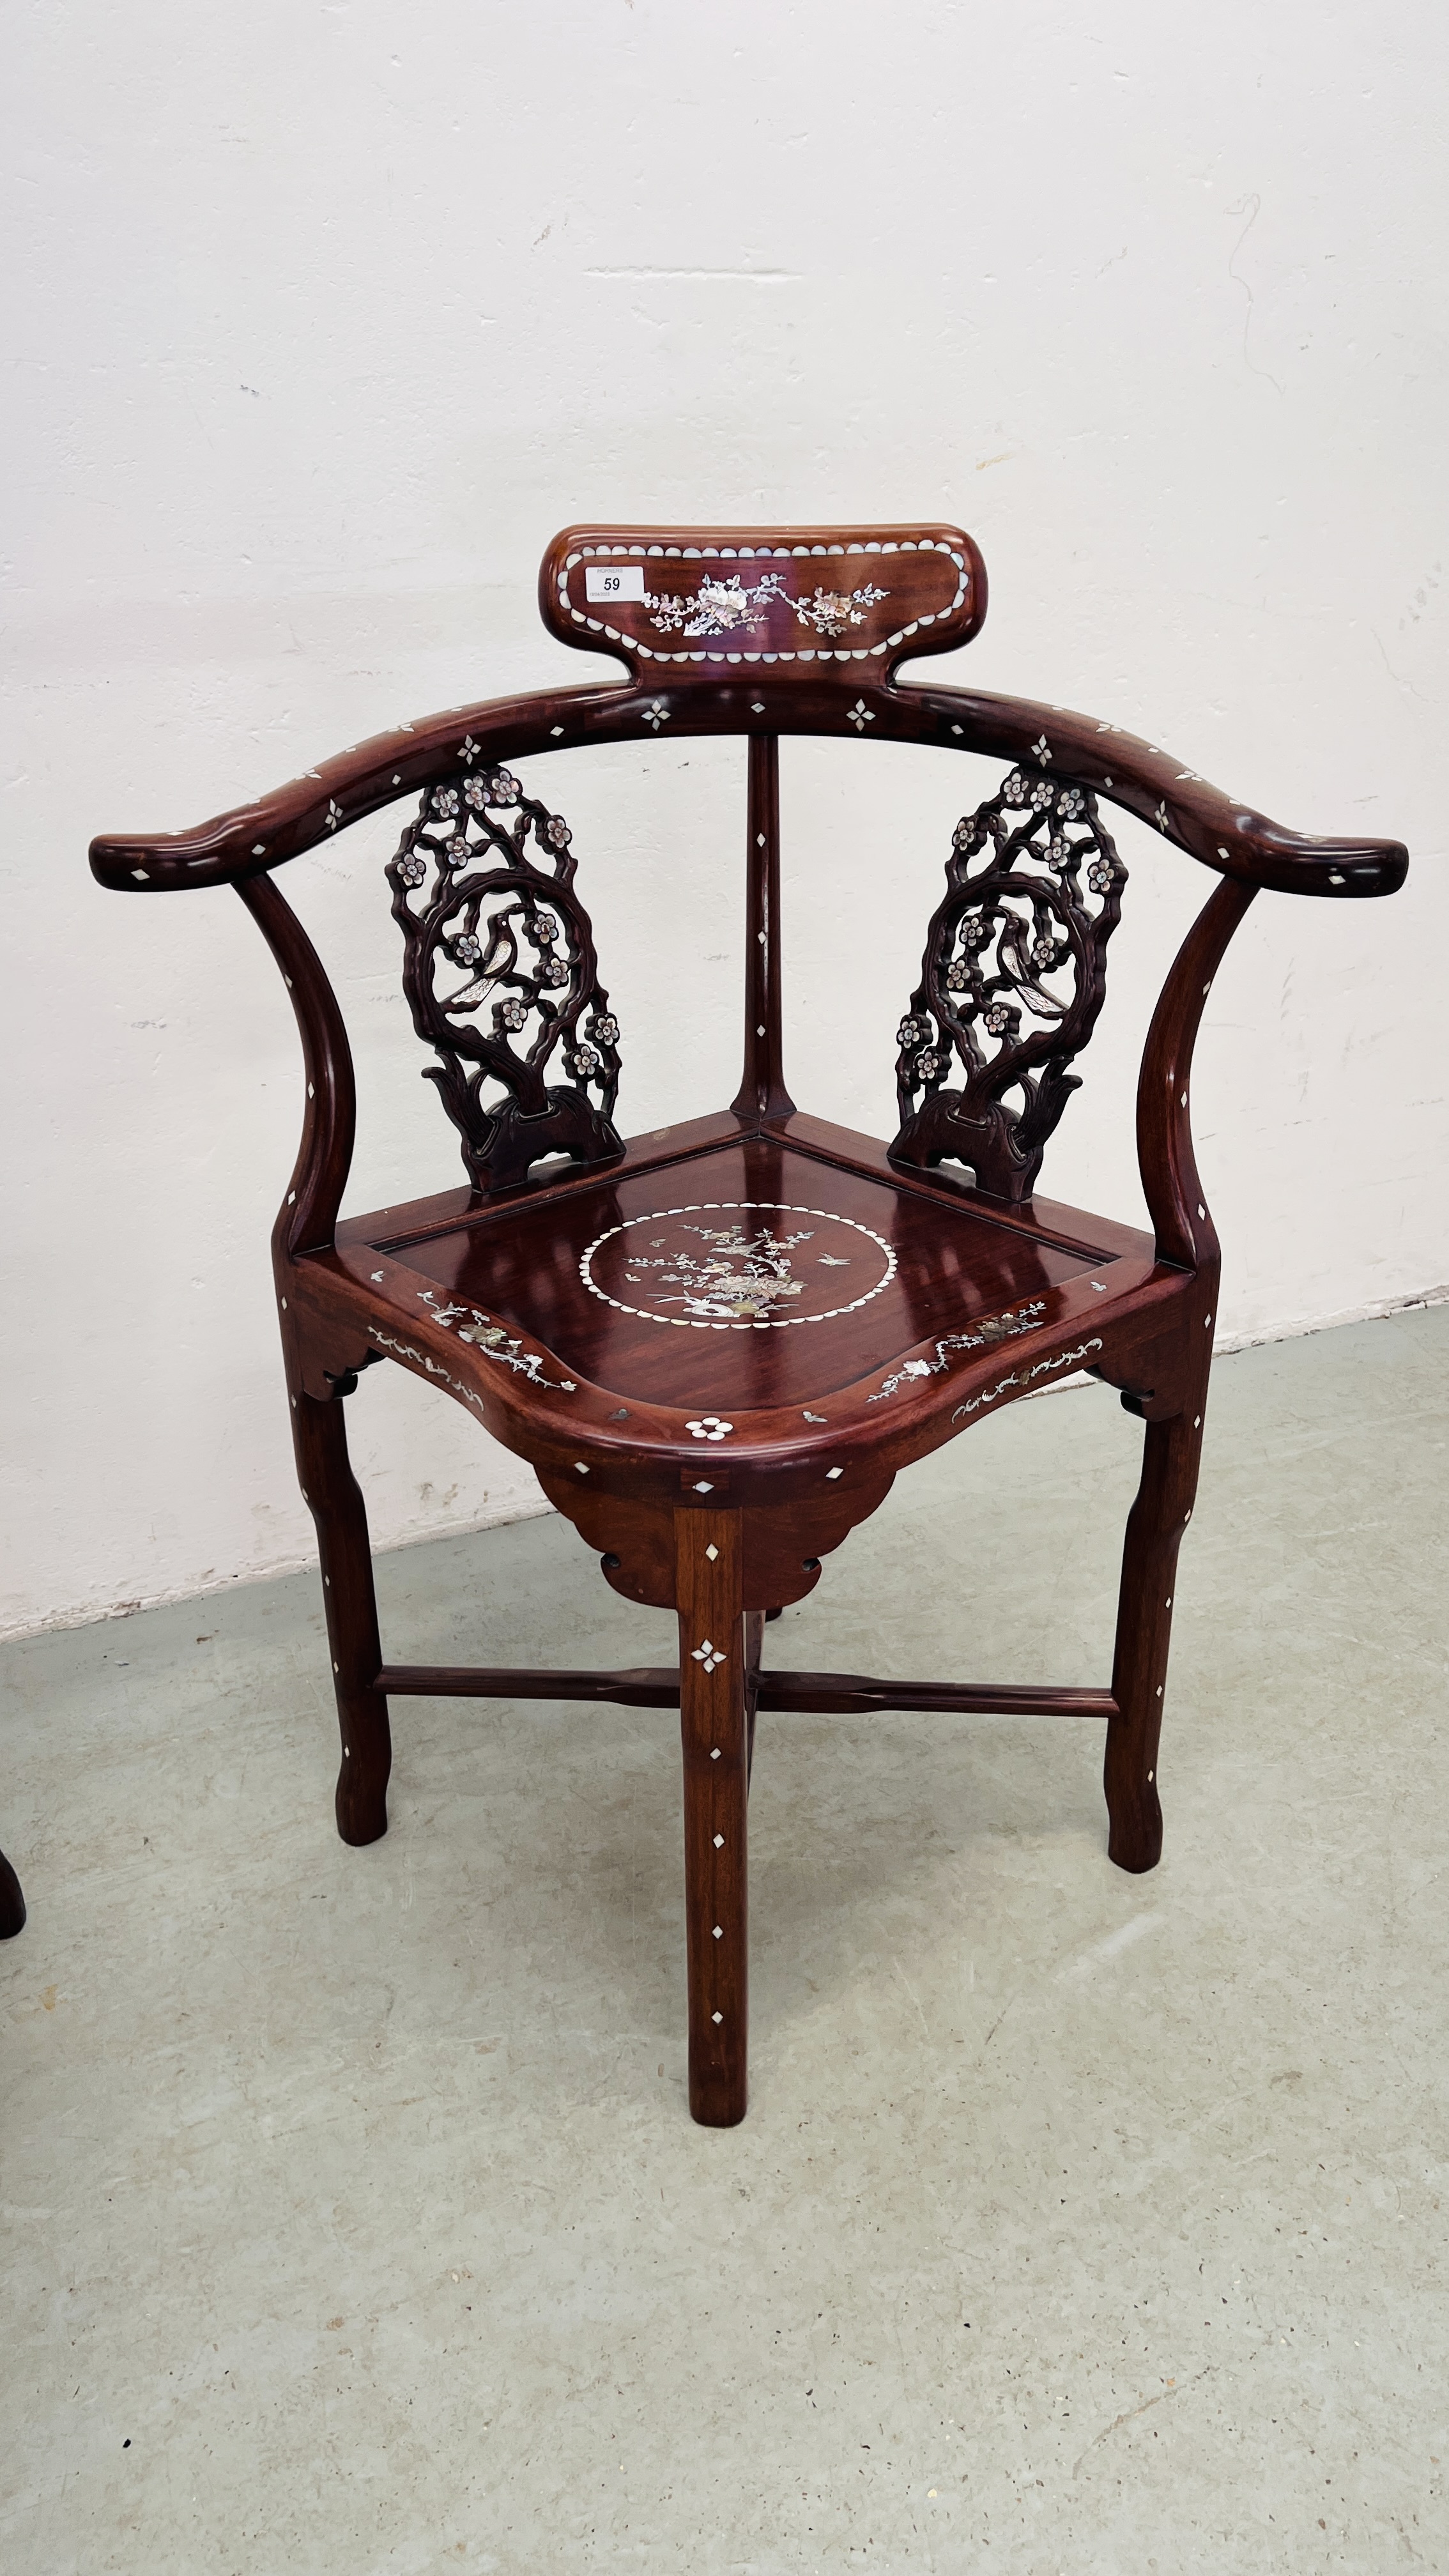 A PAIR OF ORIENTAL HARDWOOD AND MOTHER OF PEARL INLAID CORNER CHAIRS. - Image 2 of 14